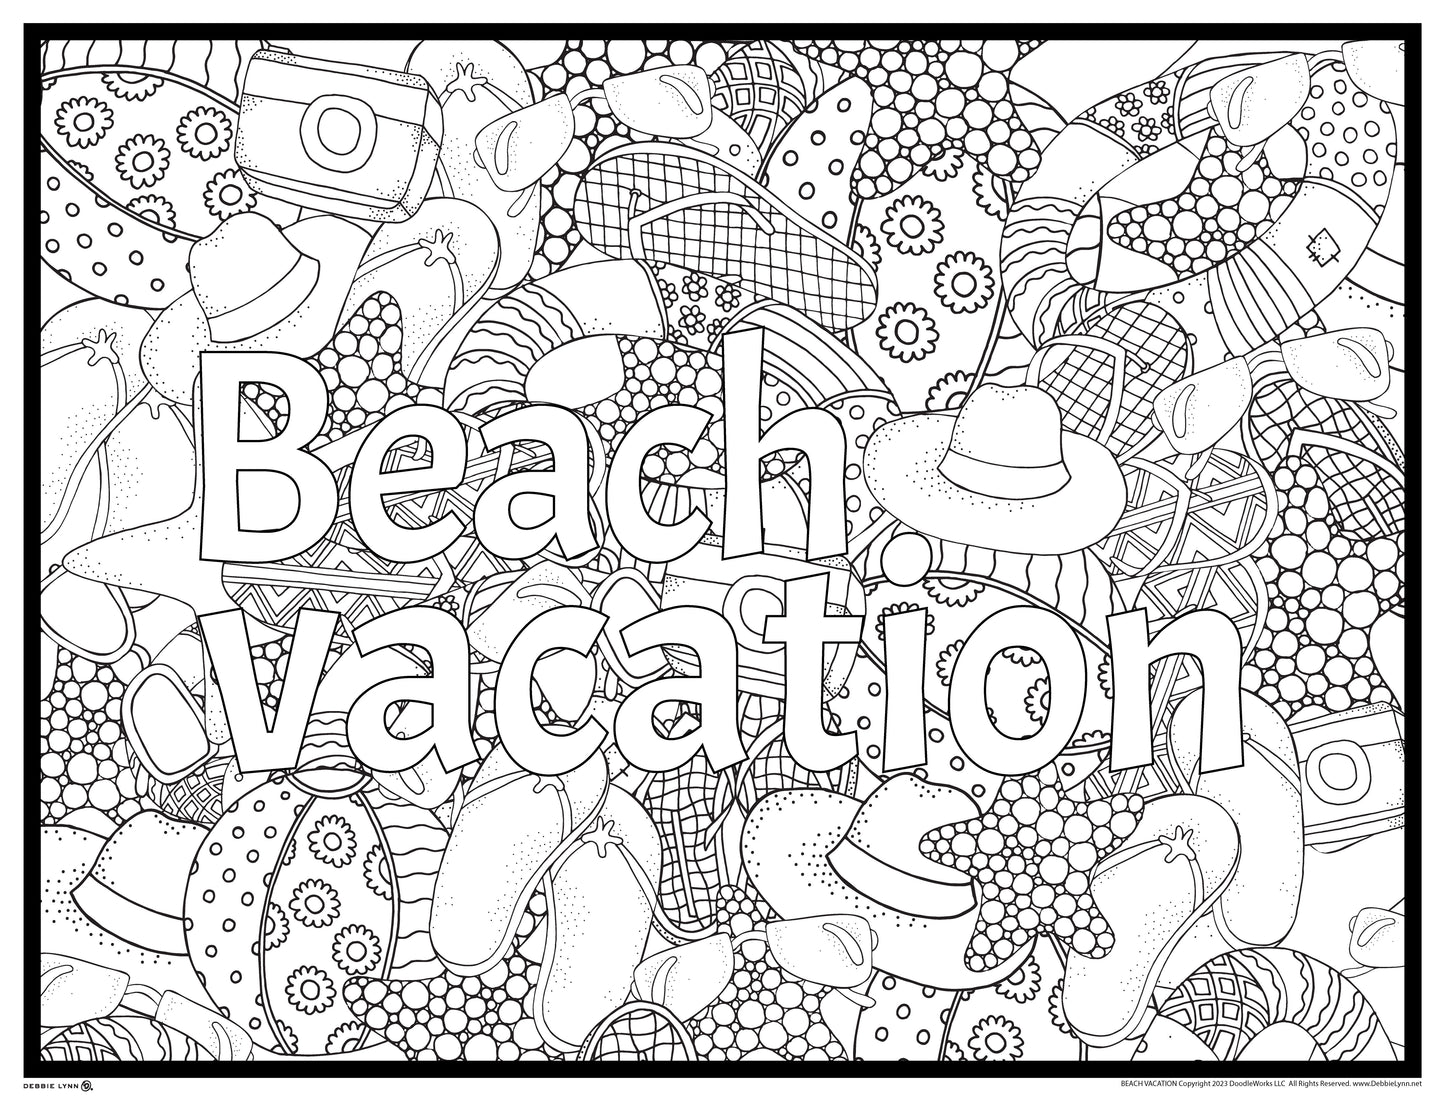 Beach Vacation Personalized Giant Coloring Poster 46"x60"